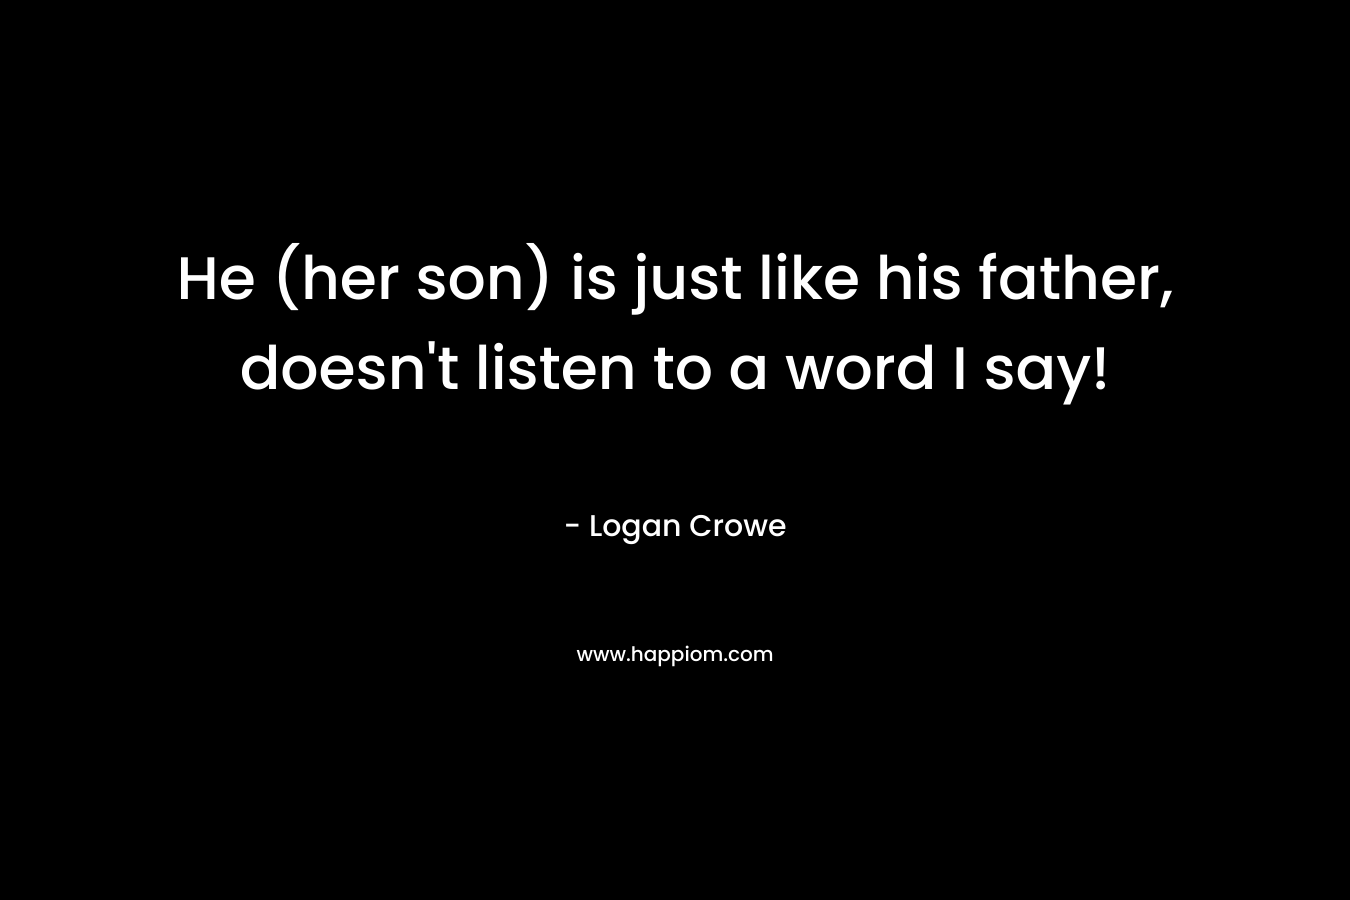 He (her son) is just like his father, doesn't listen to a word I say!